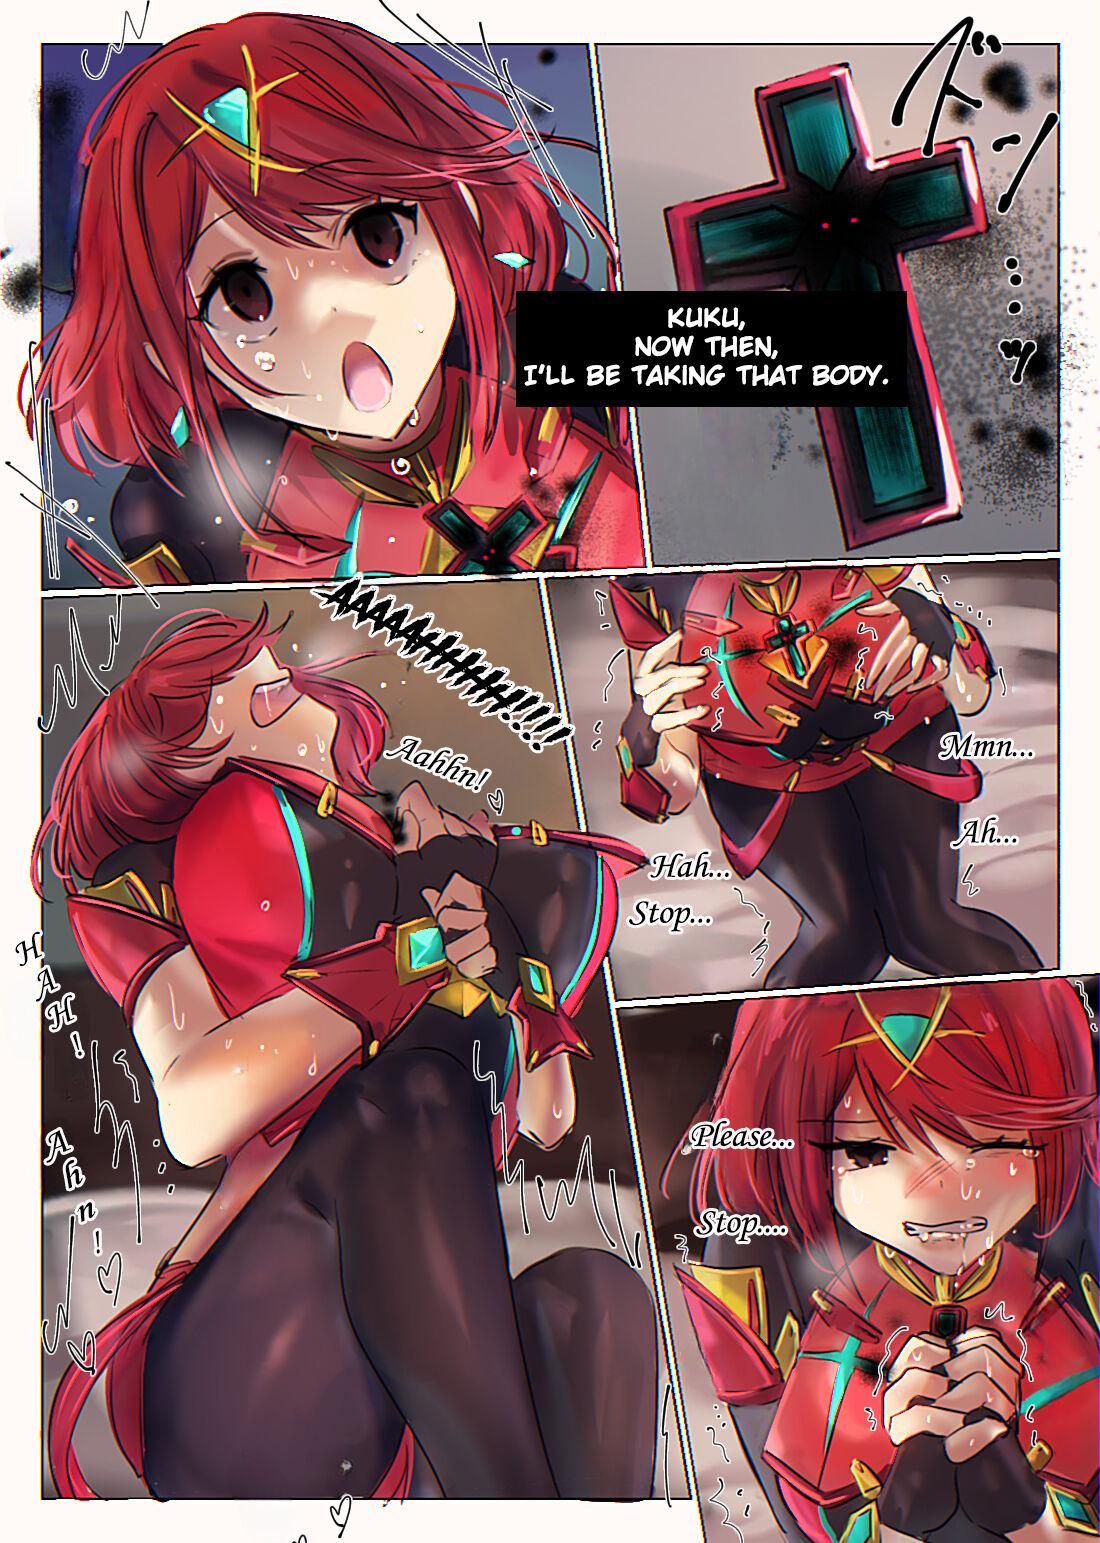 Fun Possessing Pyra and Mythra - Xenoblade chronicles 2 Home - Page 4